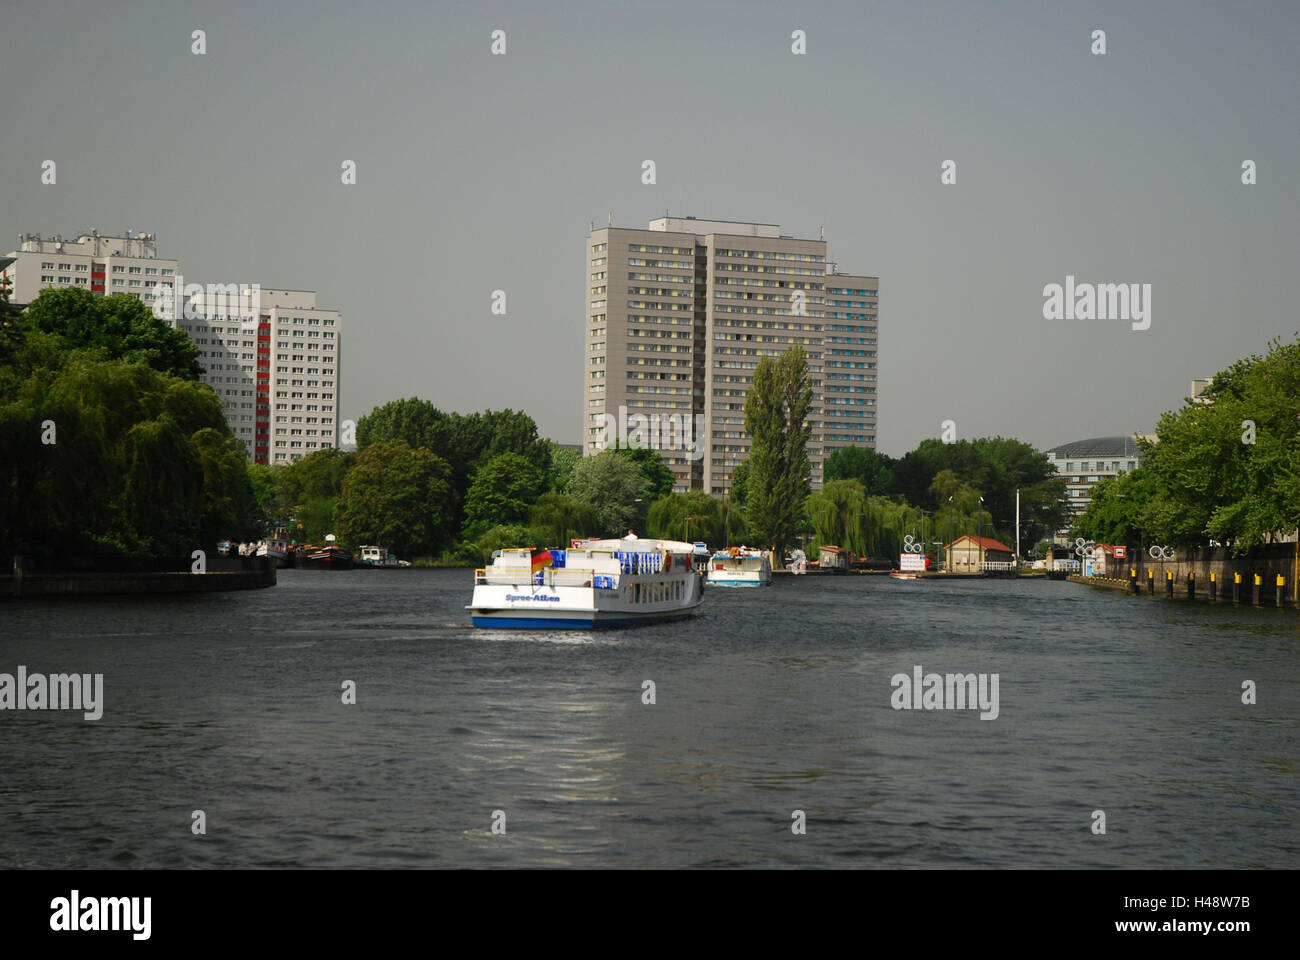 Germany, Berlin, Friedrich's grove, high rises, the Spree, boots, capital, Berlin-Friedrich's grove, river, building, residential blocks, shores, riversides, ships, excursion boats, tourism, Stock Photo